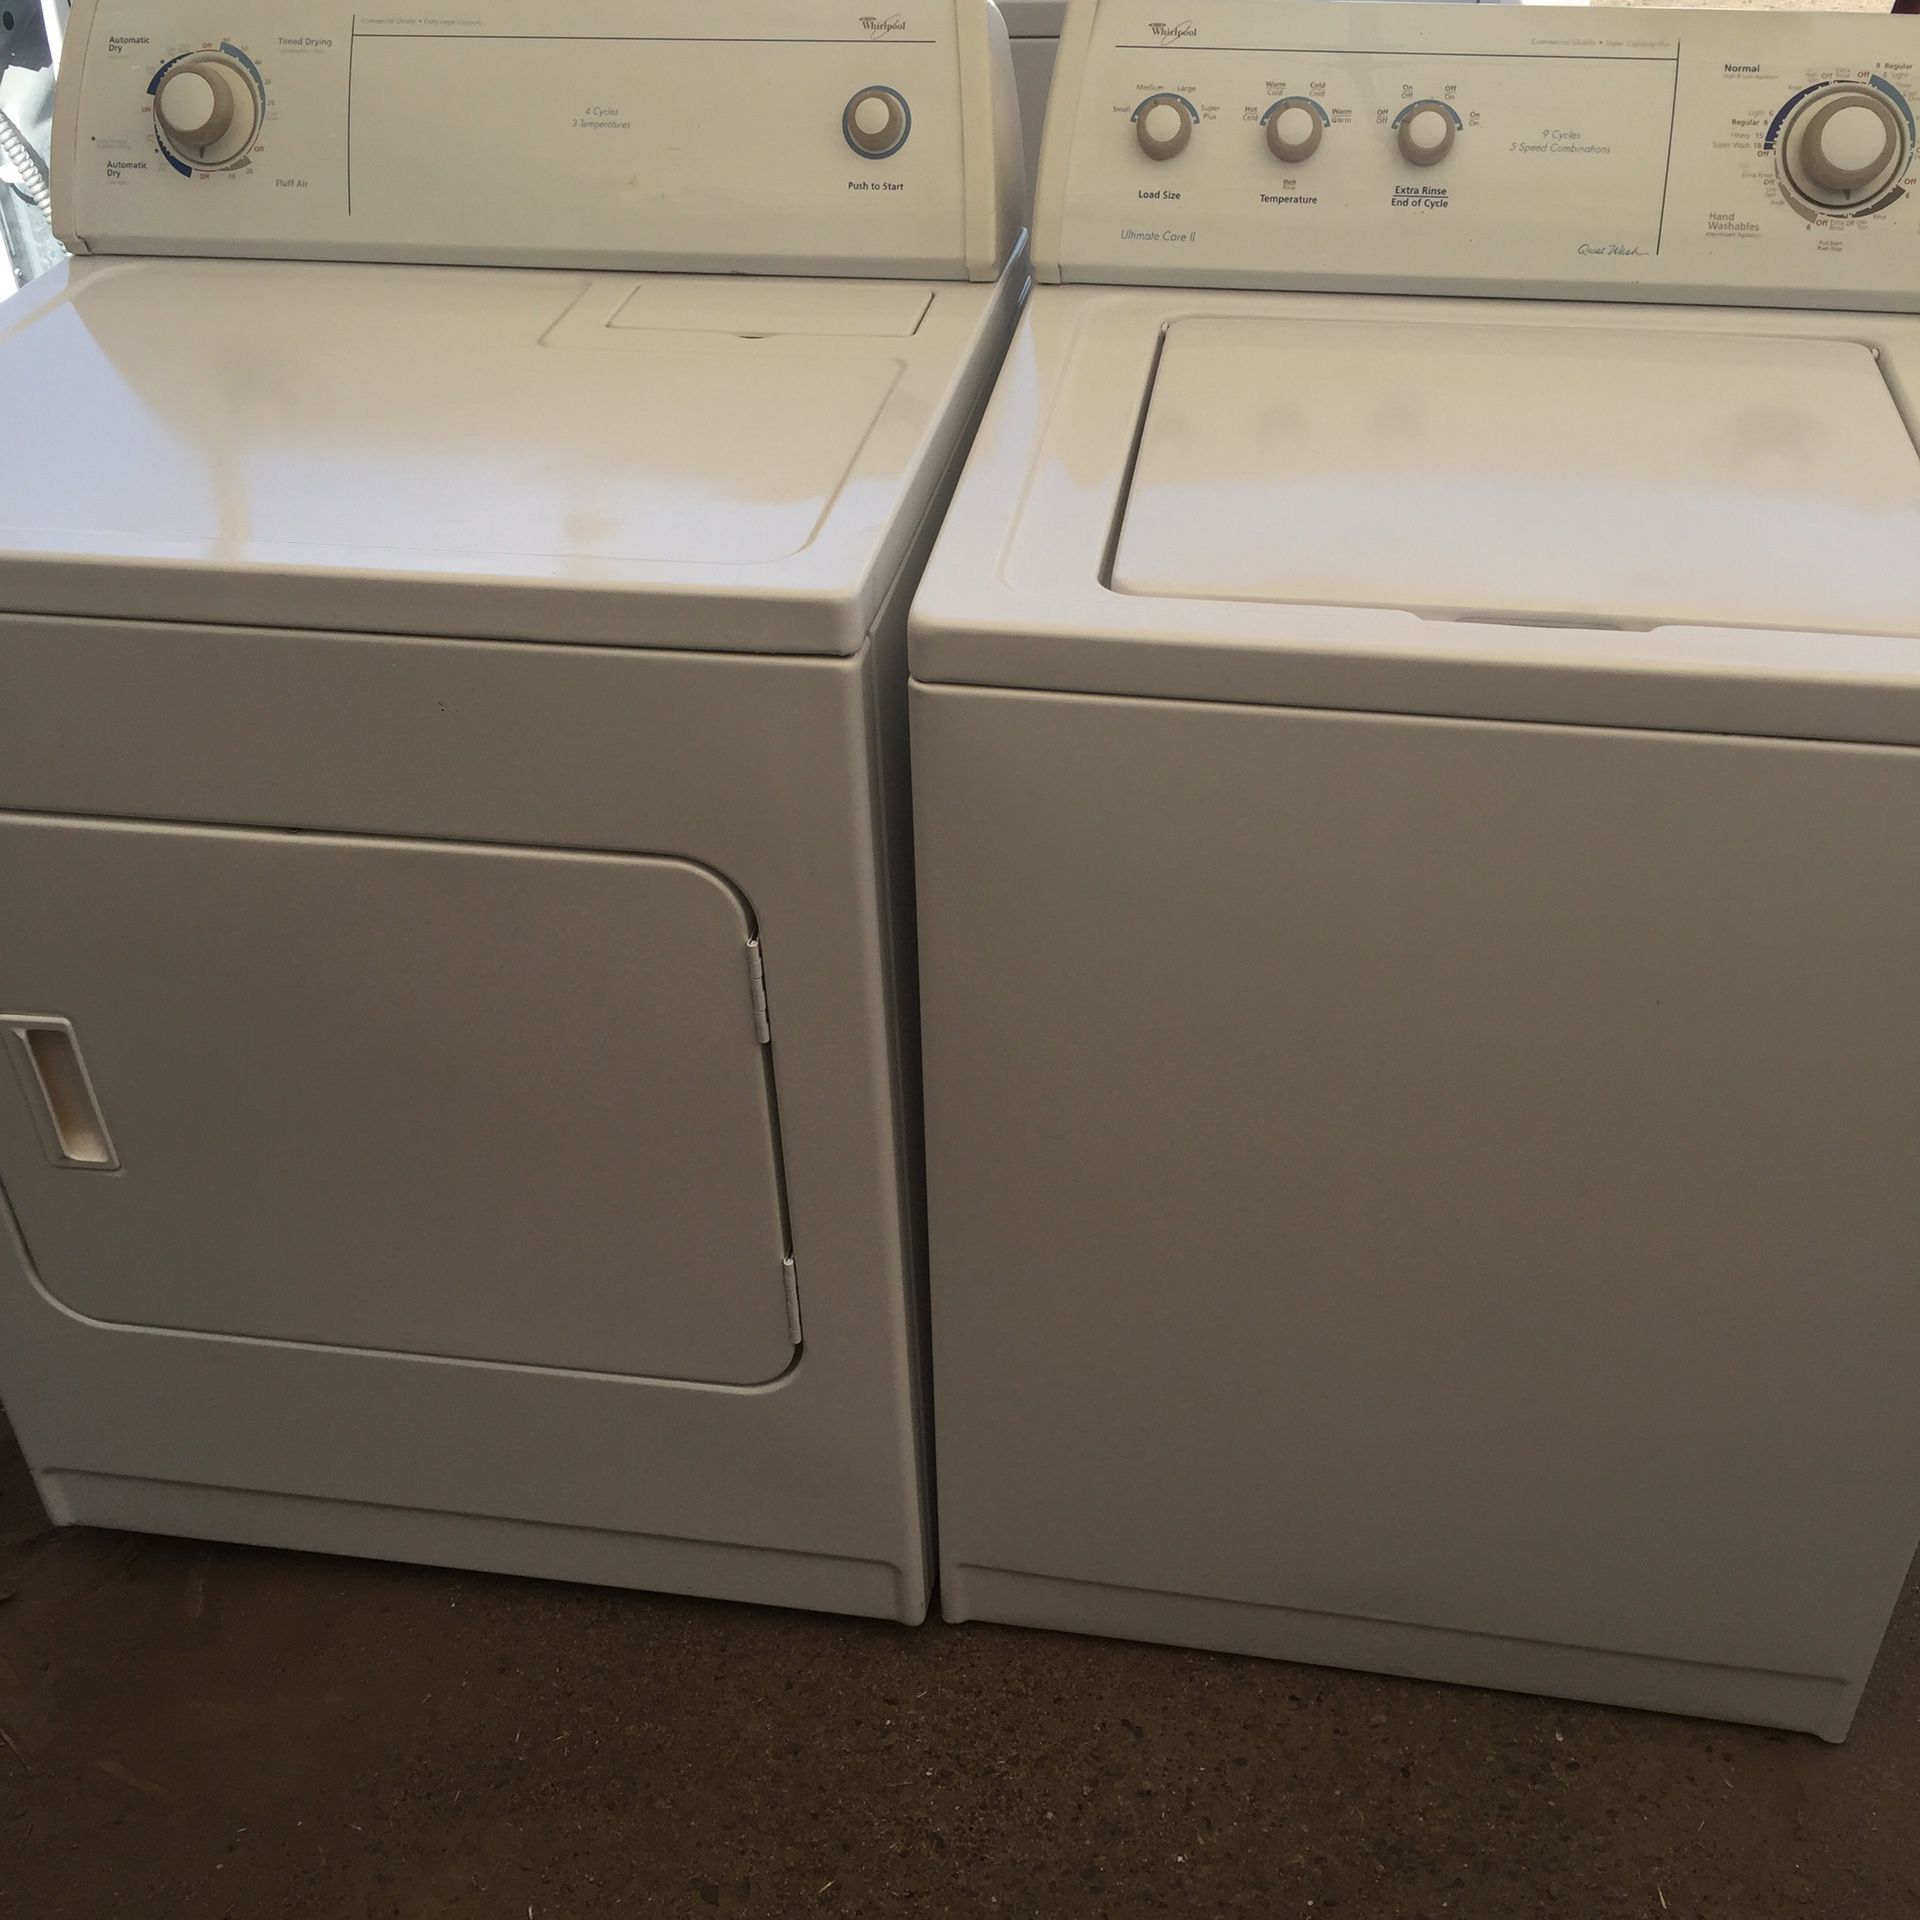 Whirlpool washer and dryer